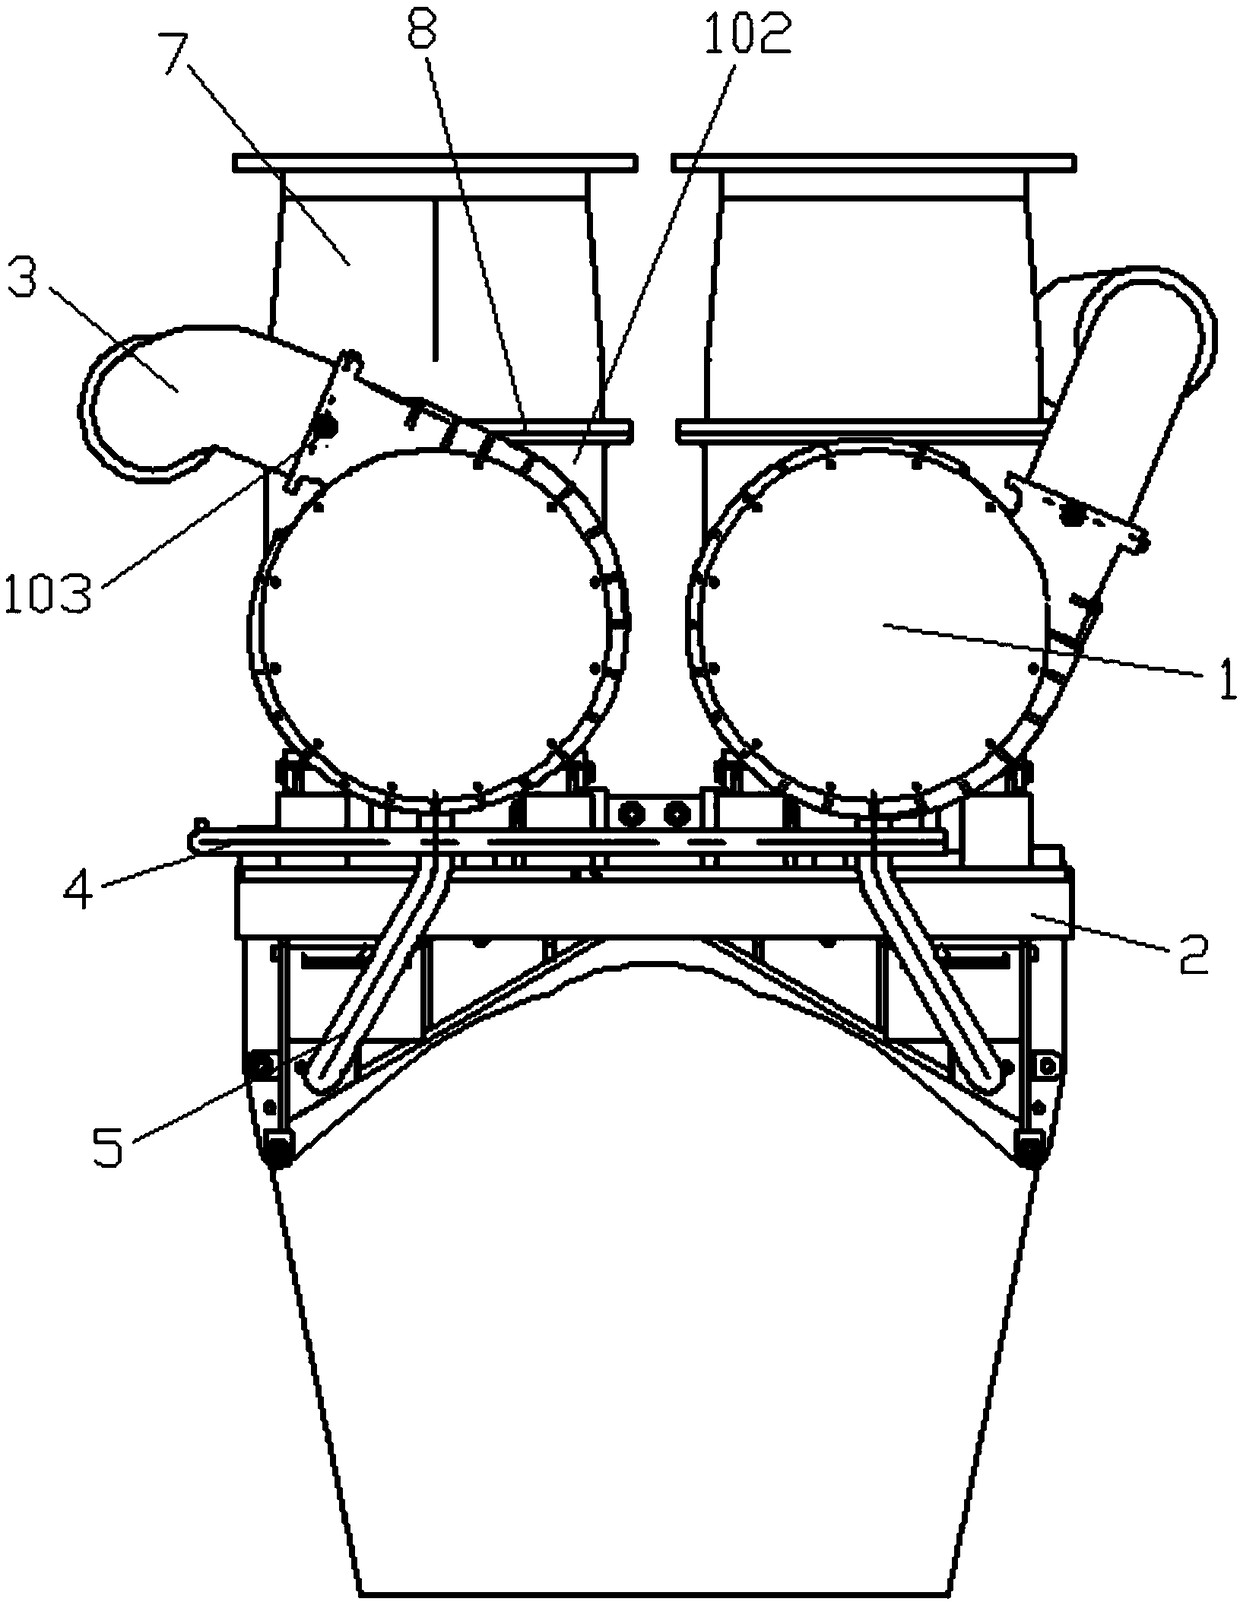 Connecting and mounting structure of diesel engine and matched TPR61 supercharger